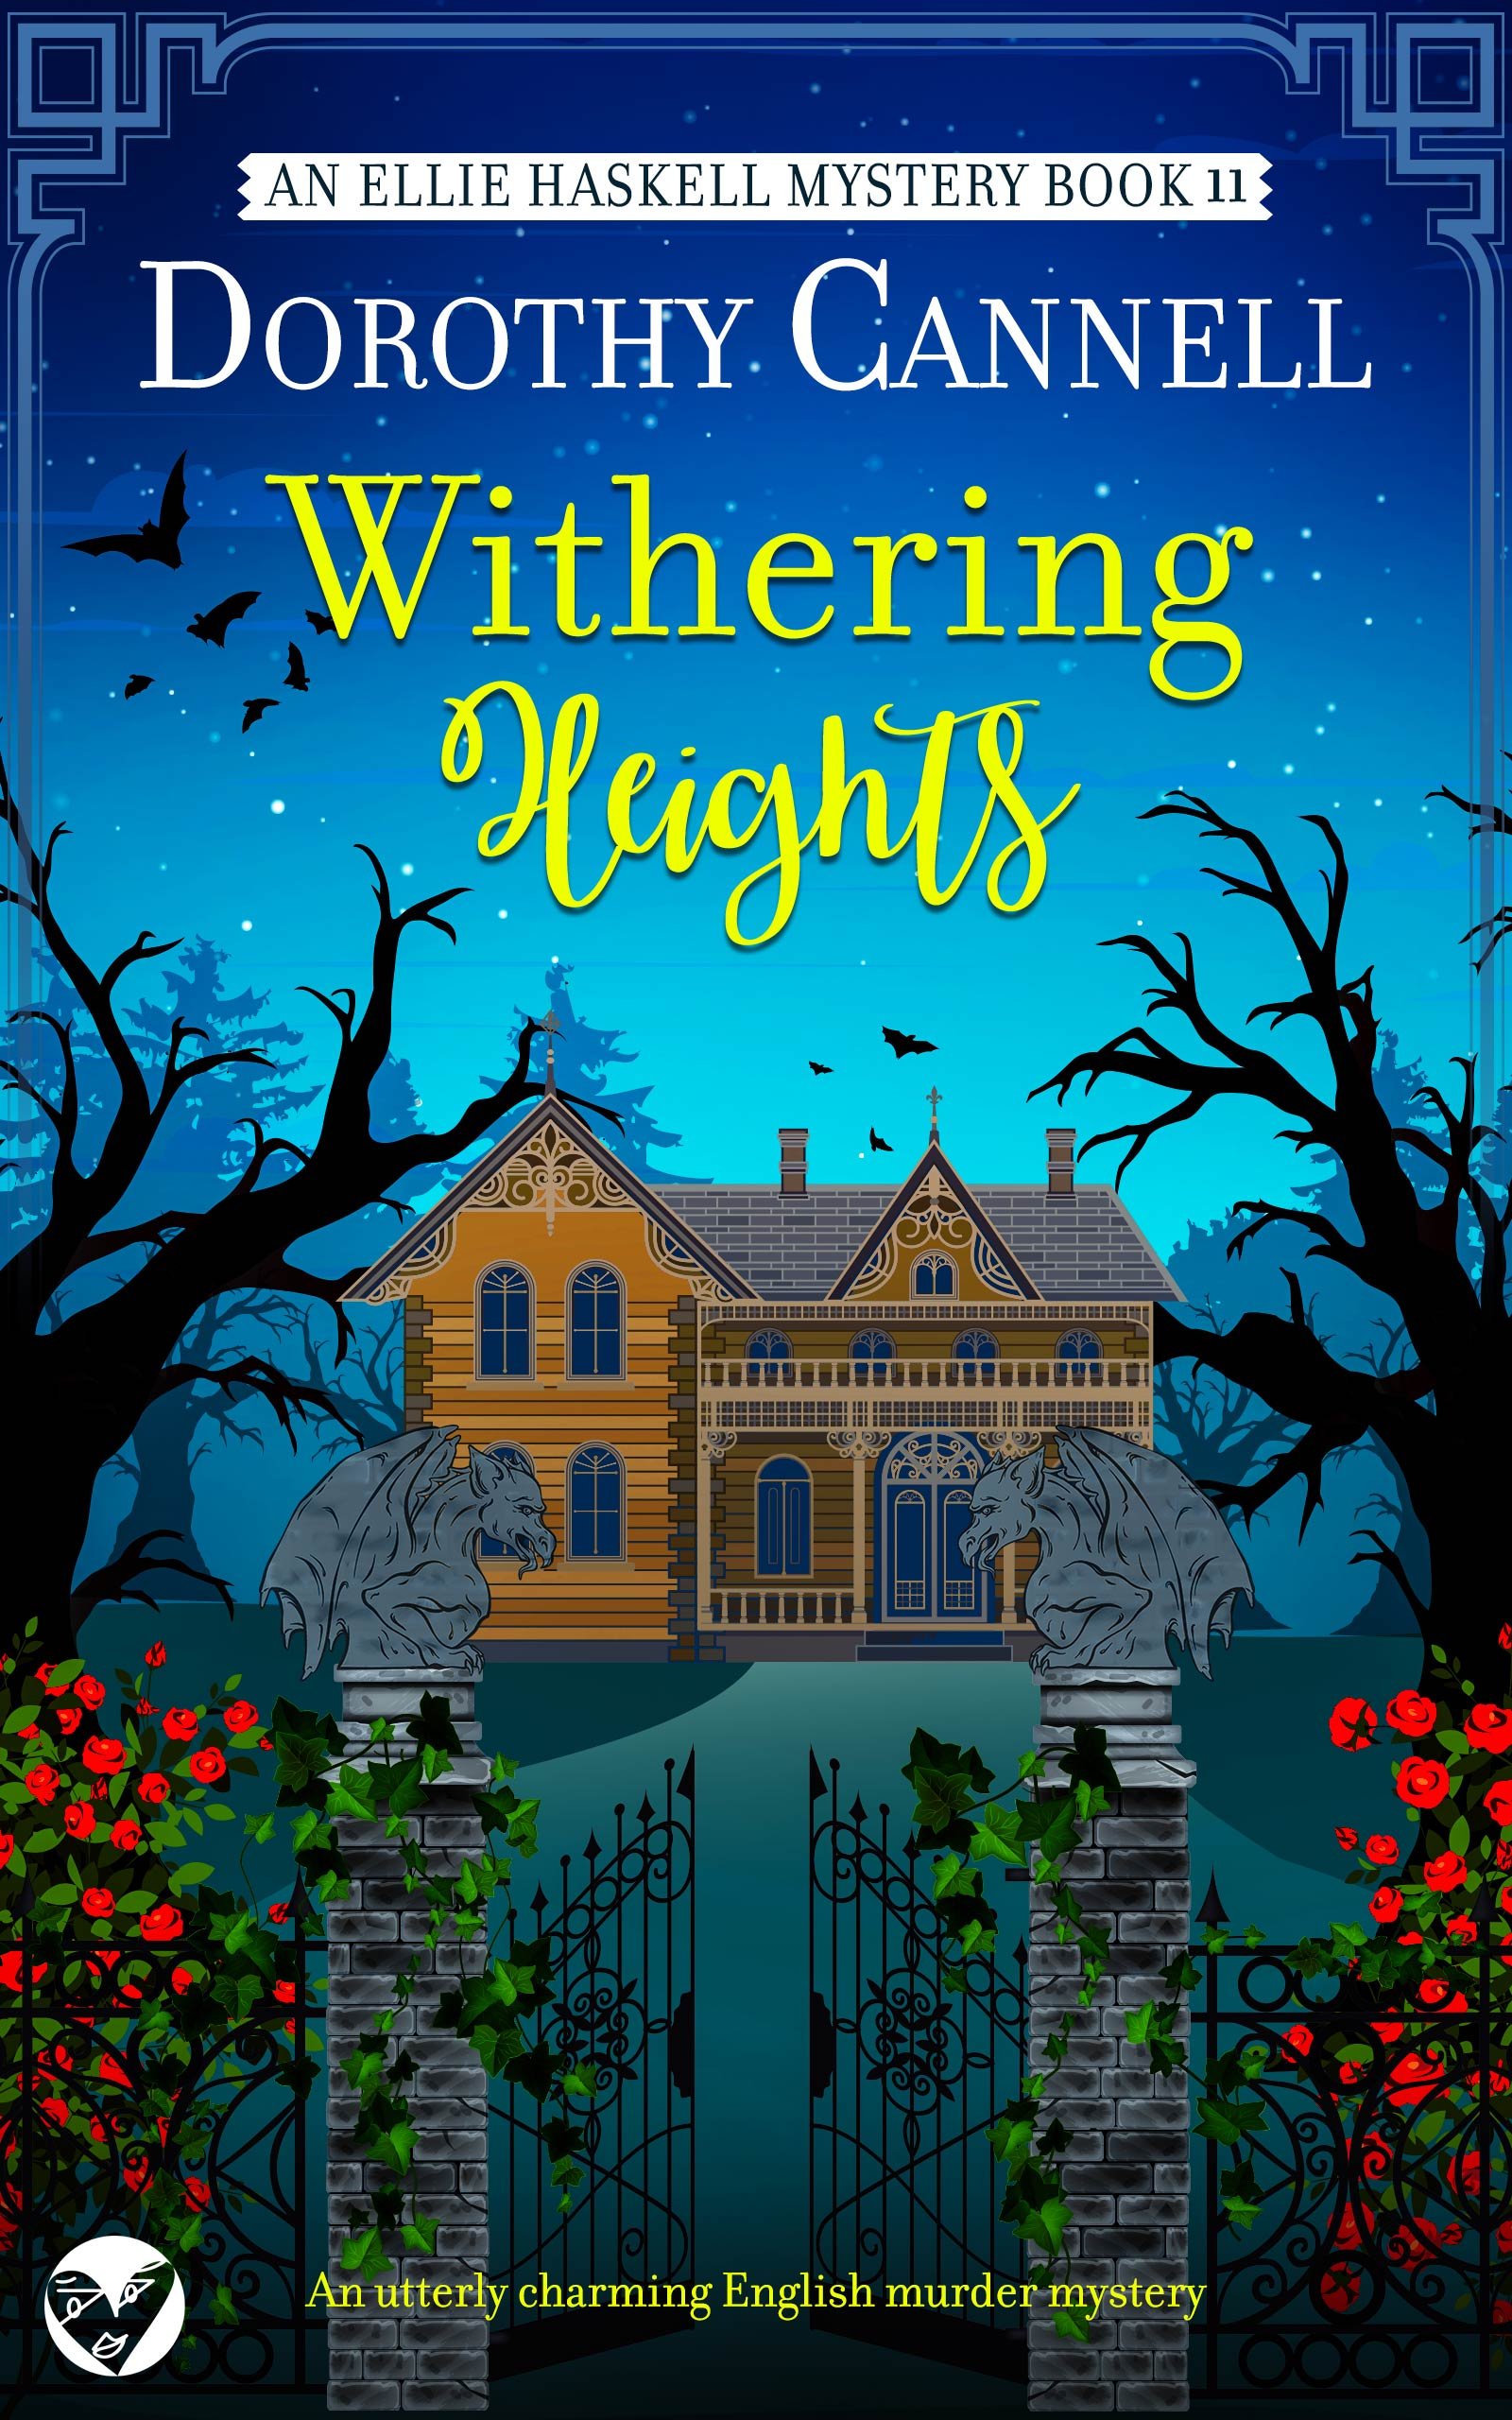 WITHERING HEIGHTS 564k cover publish.jpg